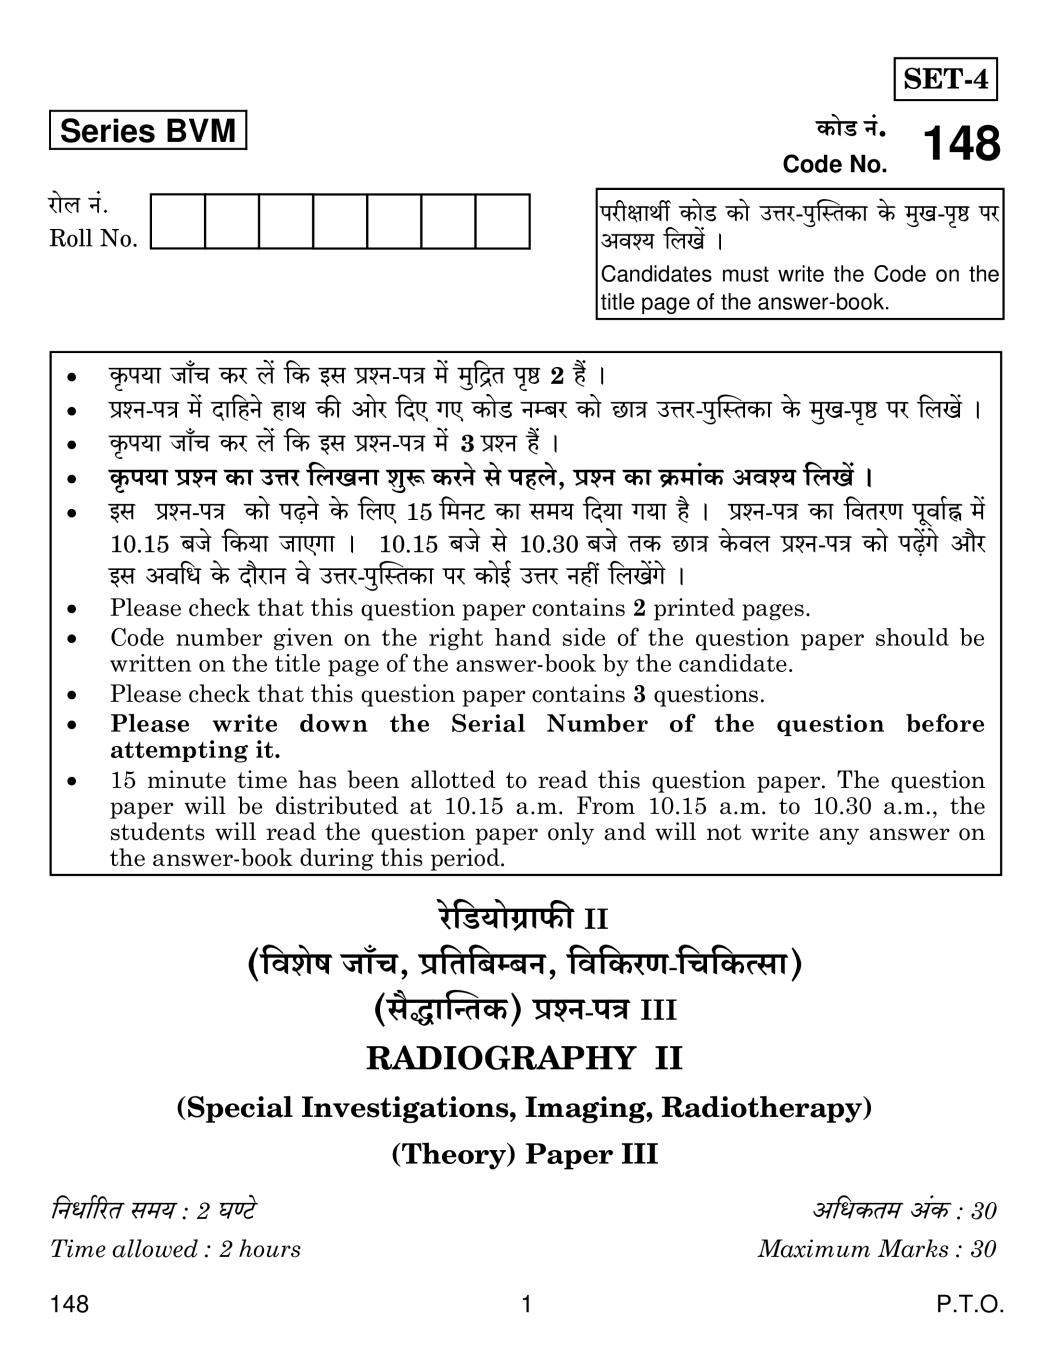 CBSE Class 12 Radiography-II Question Paper 2019 - Page 1